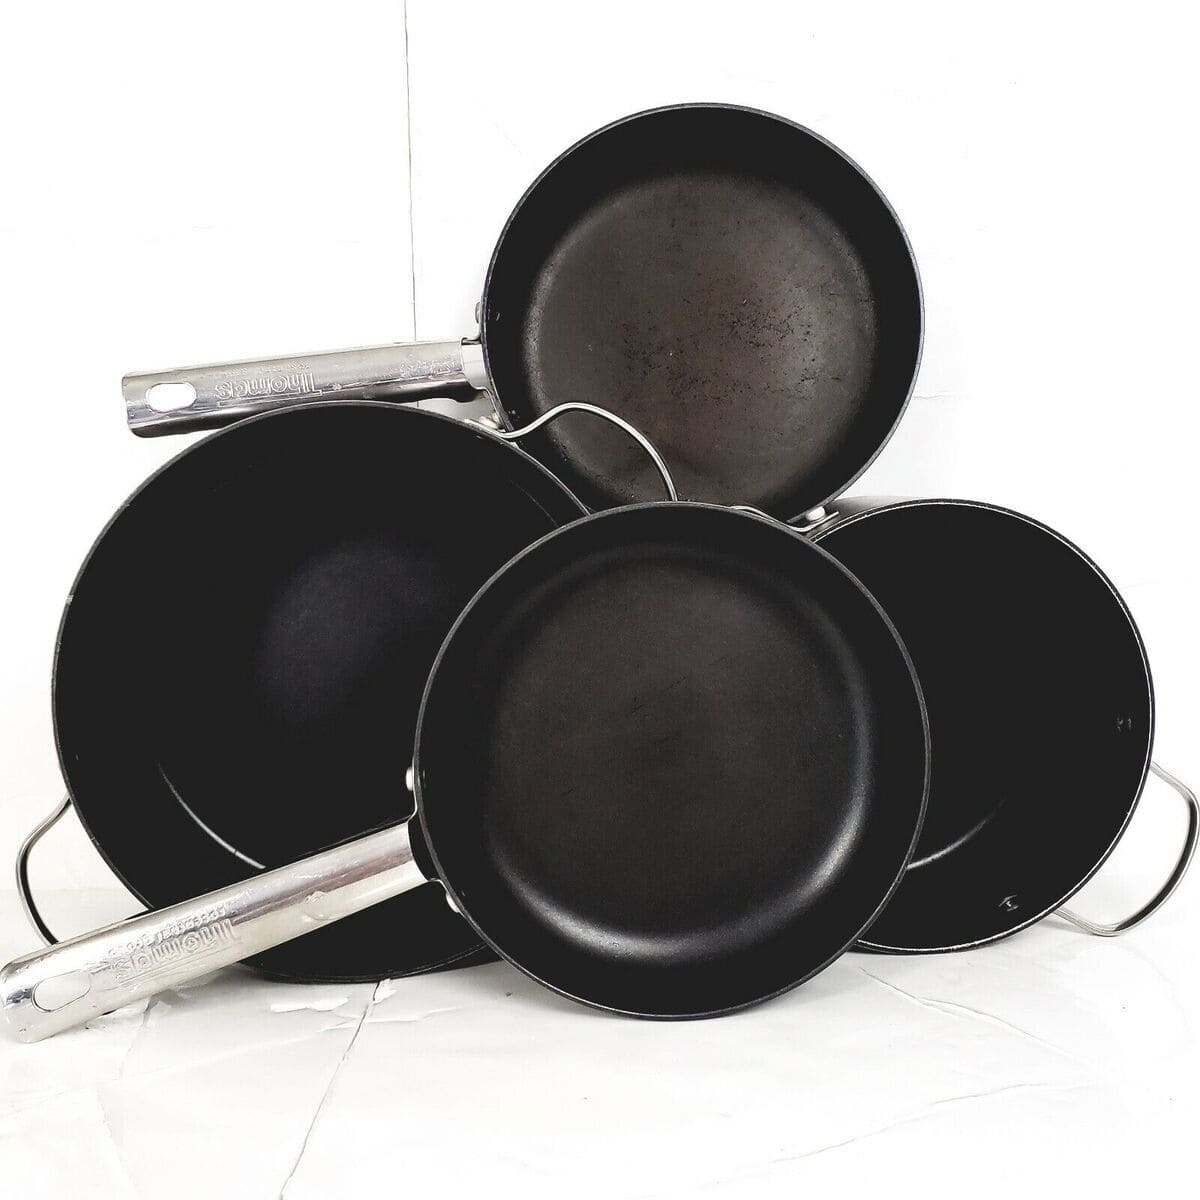 Where To Buy Thomas Rosenthal Cookware